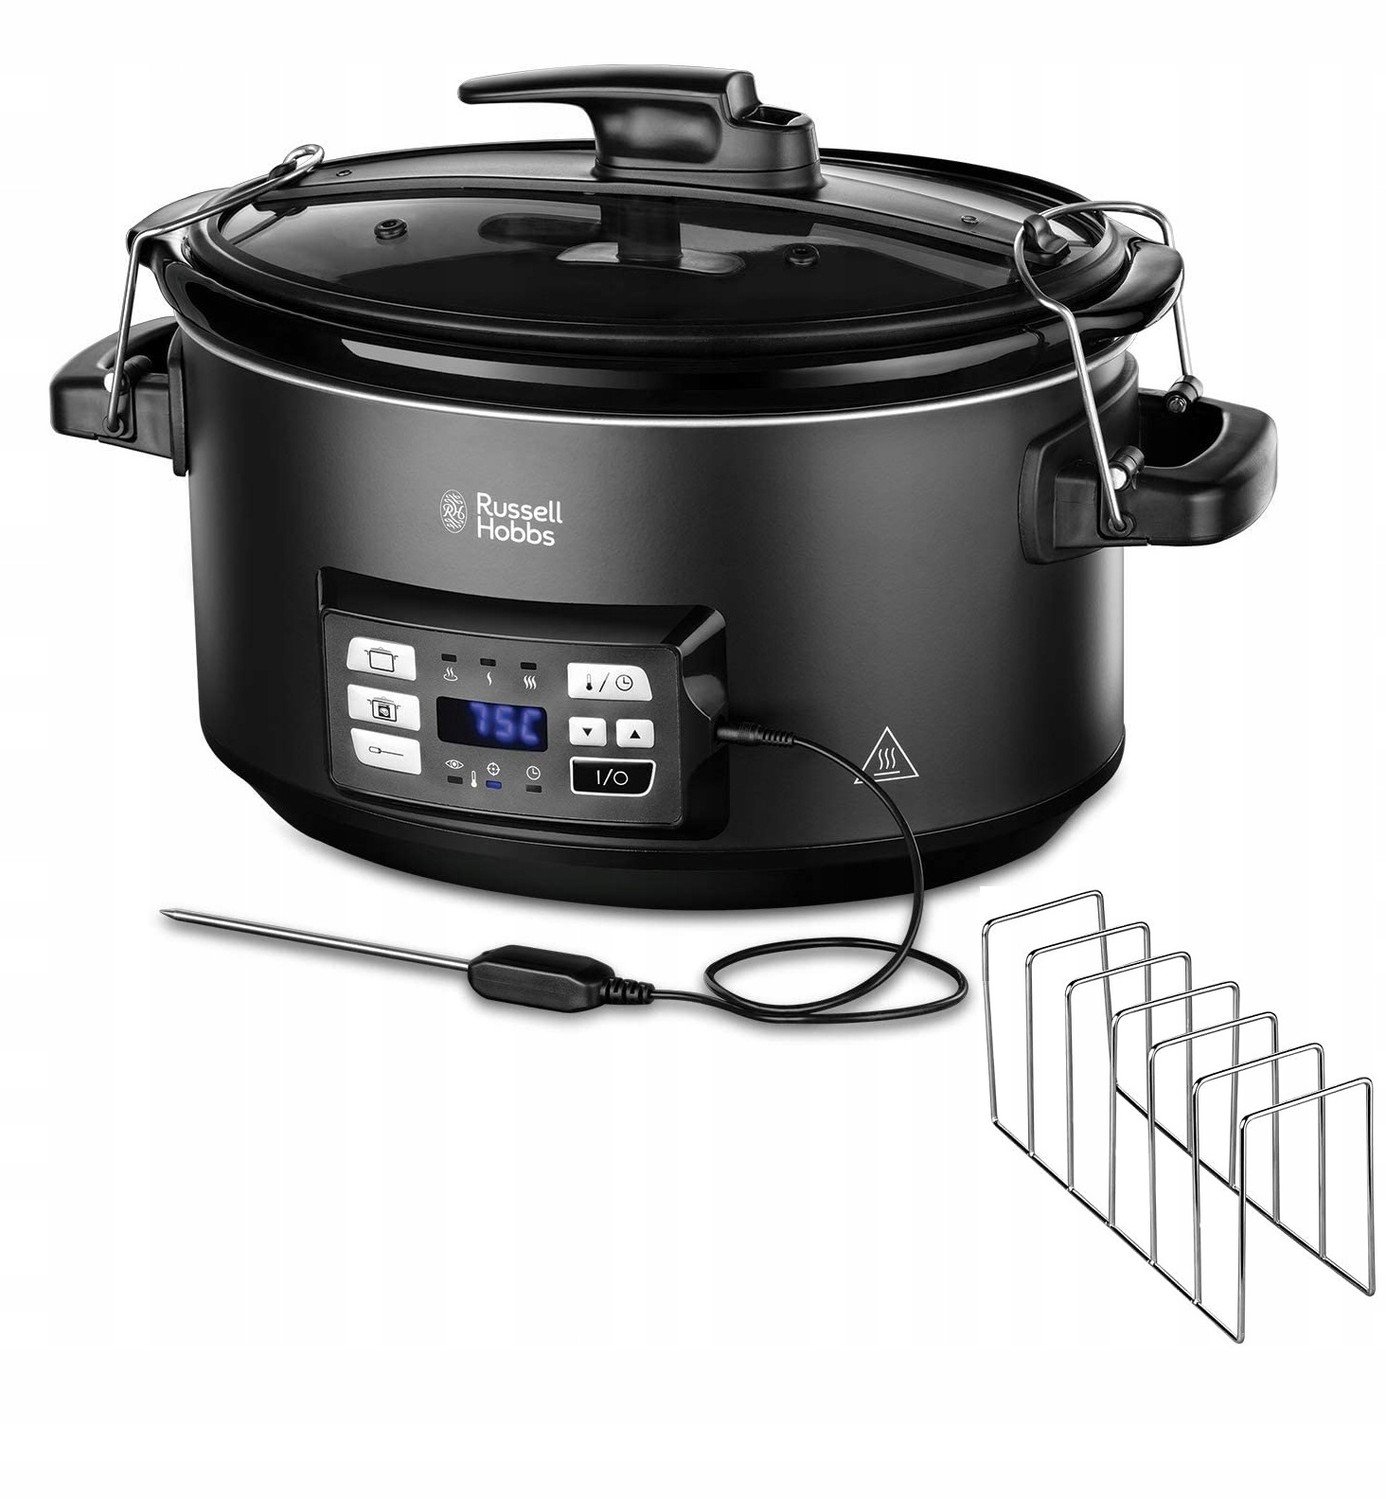 Pomalý hrnec 6,5L Slow Cooker Russell Hobbs 25630-56